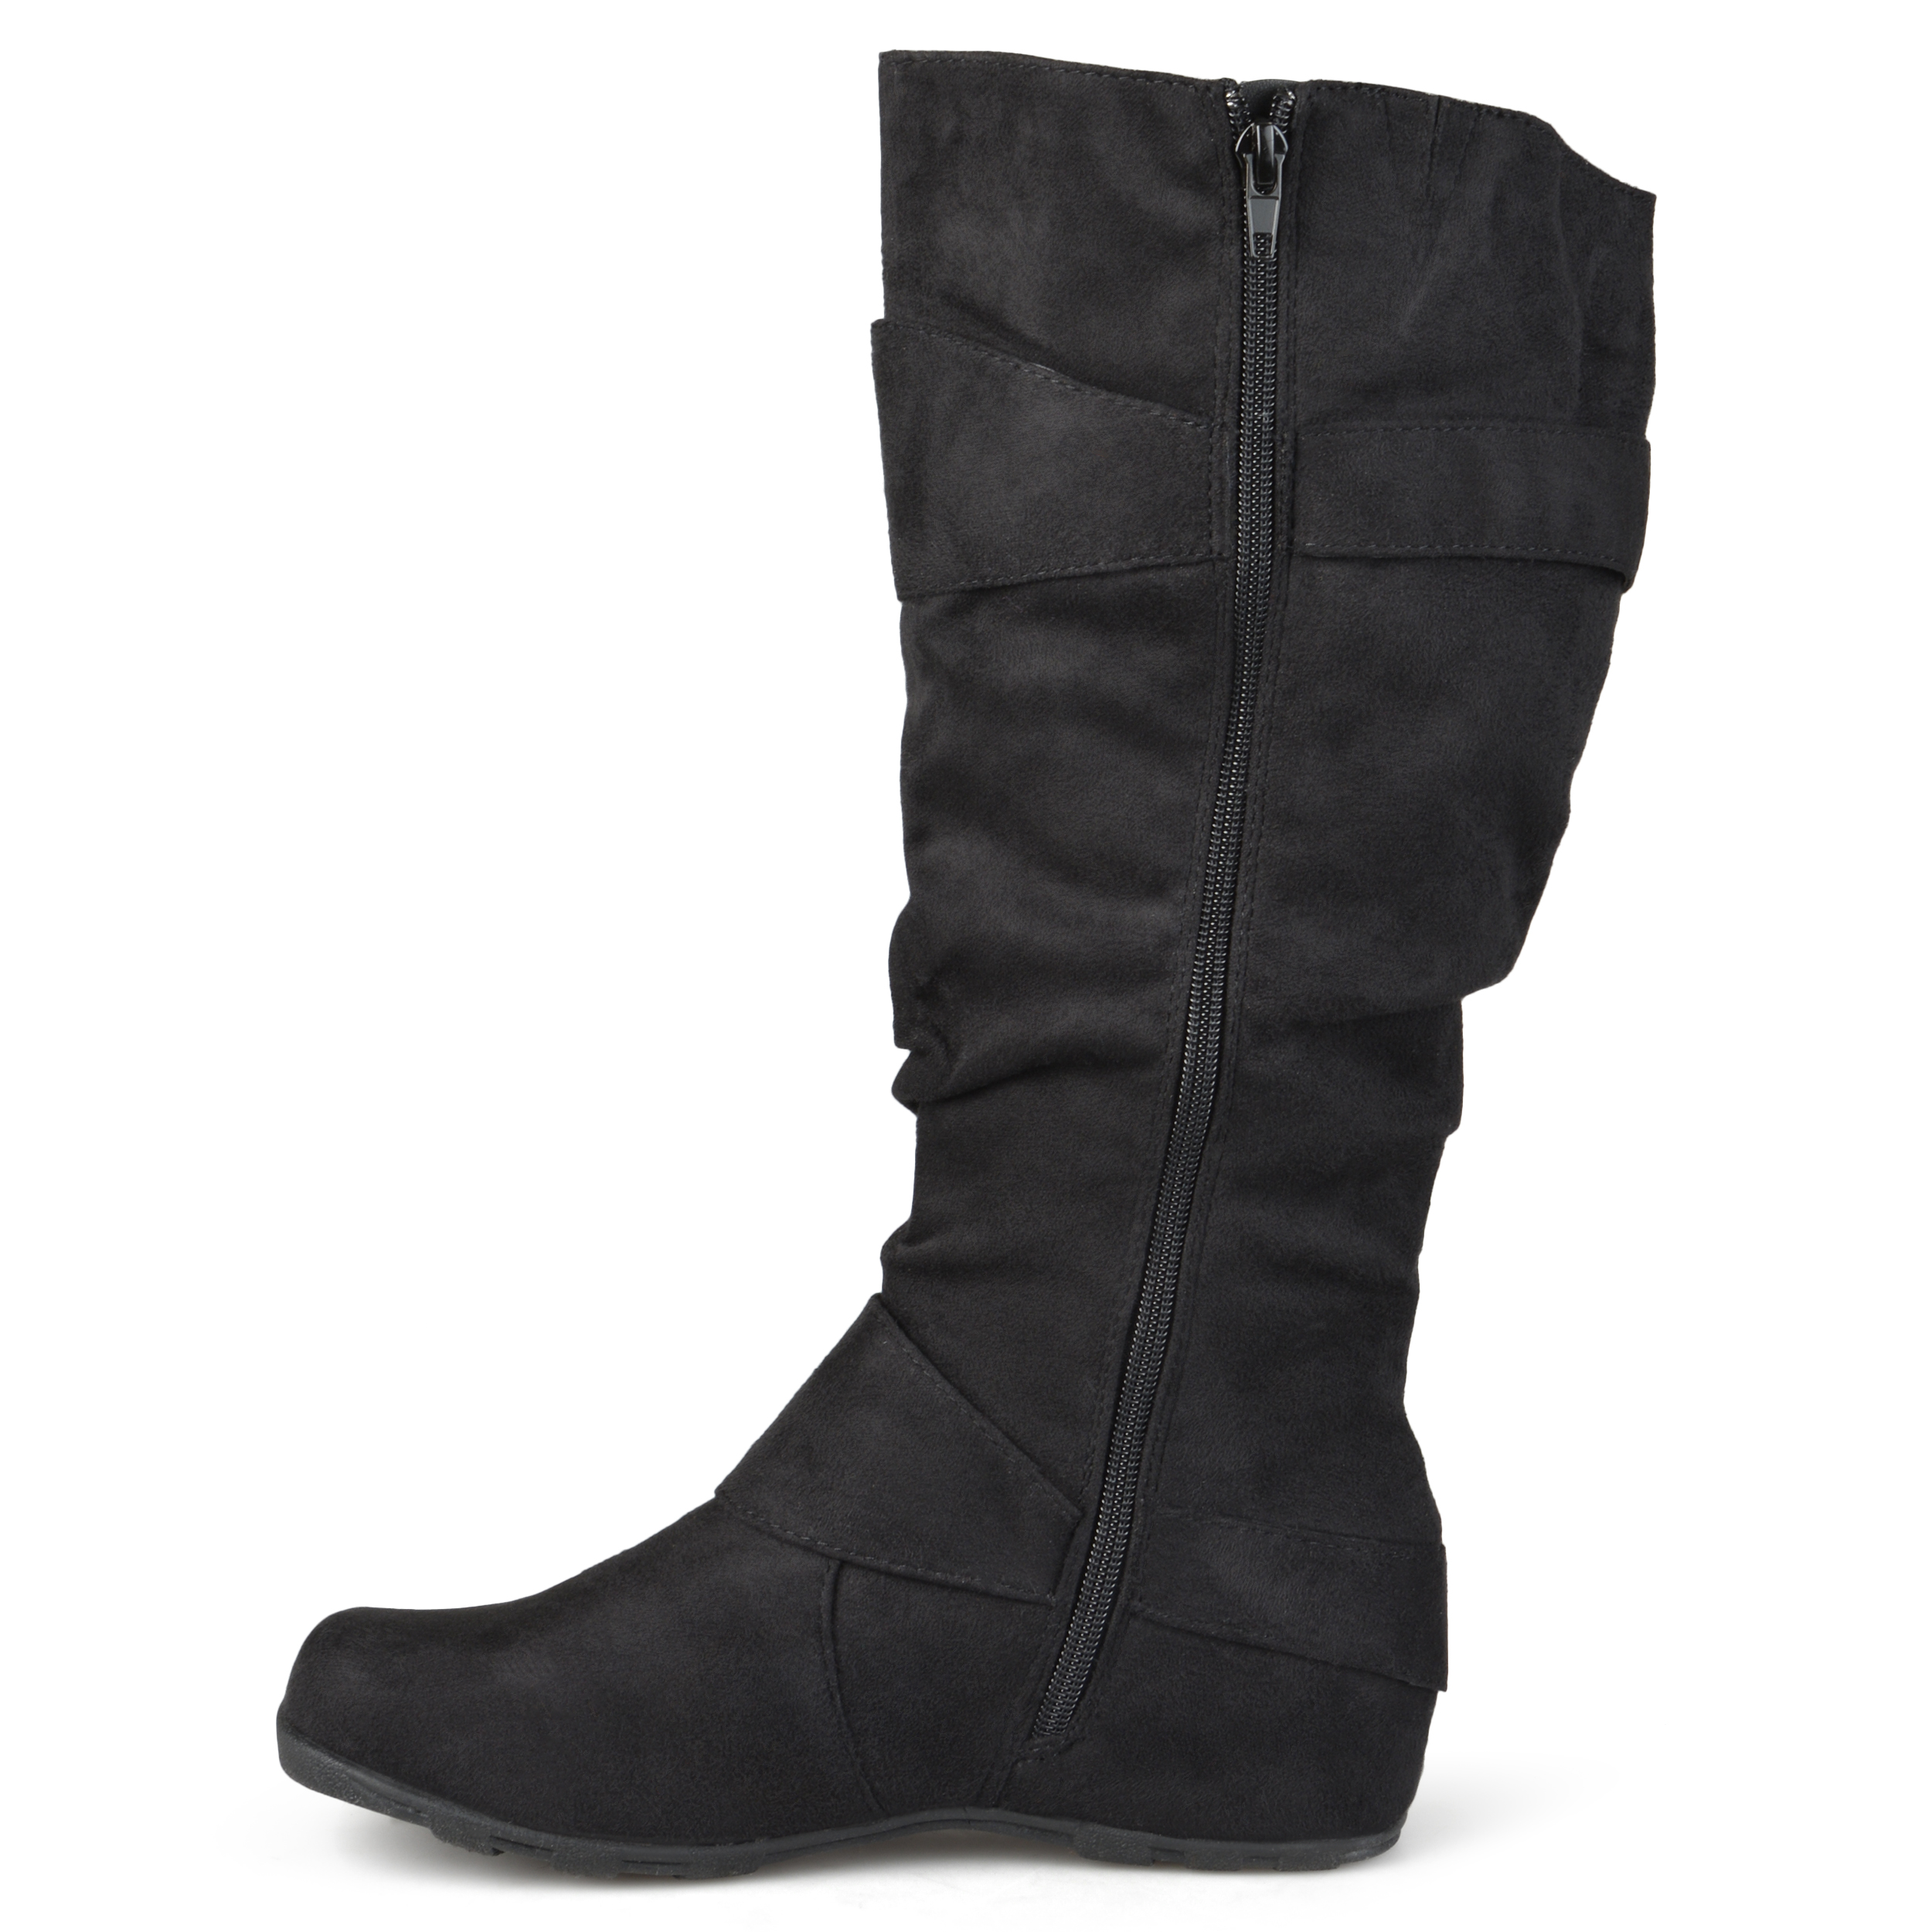 Women's August Slouchy Wide Calf Boots - image 3 of 8